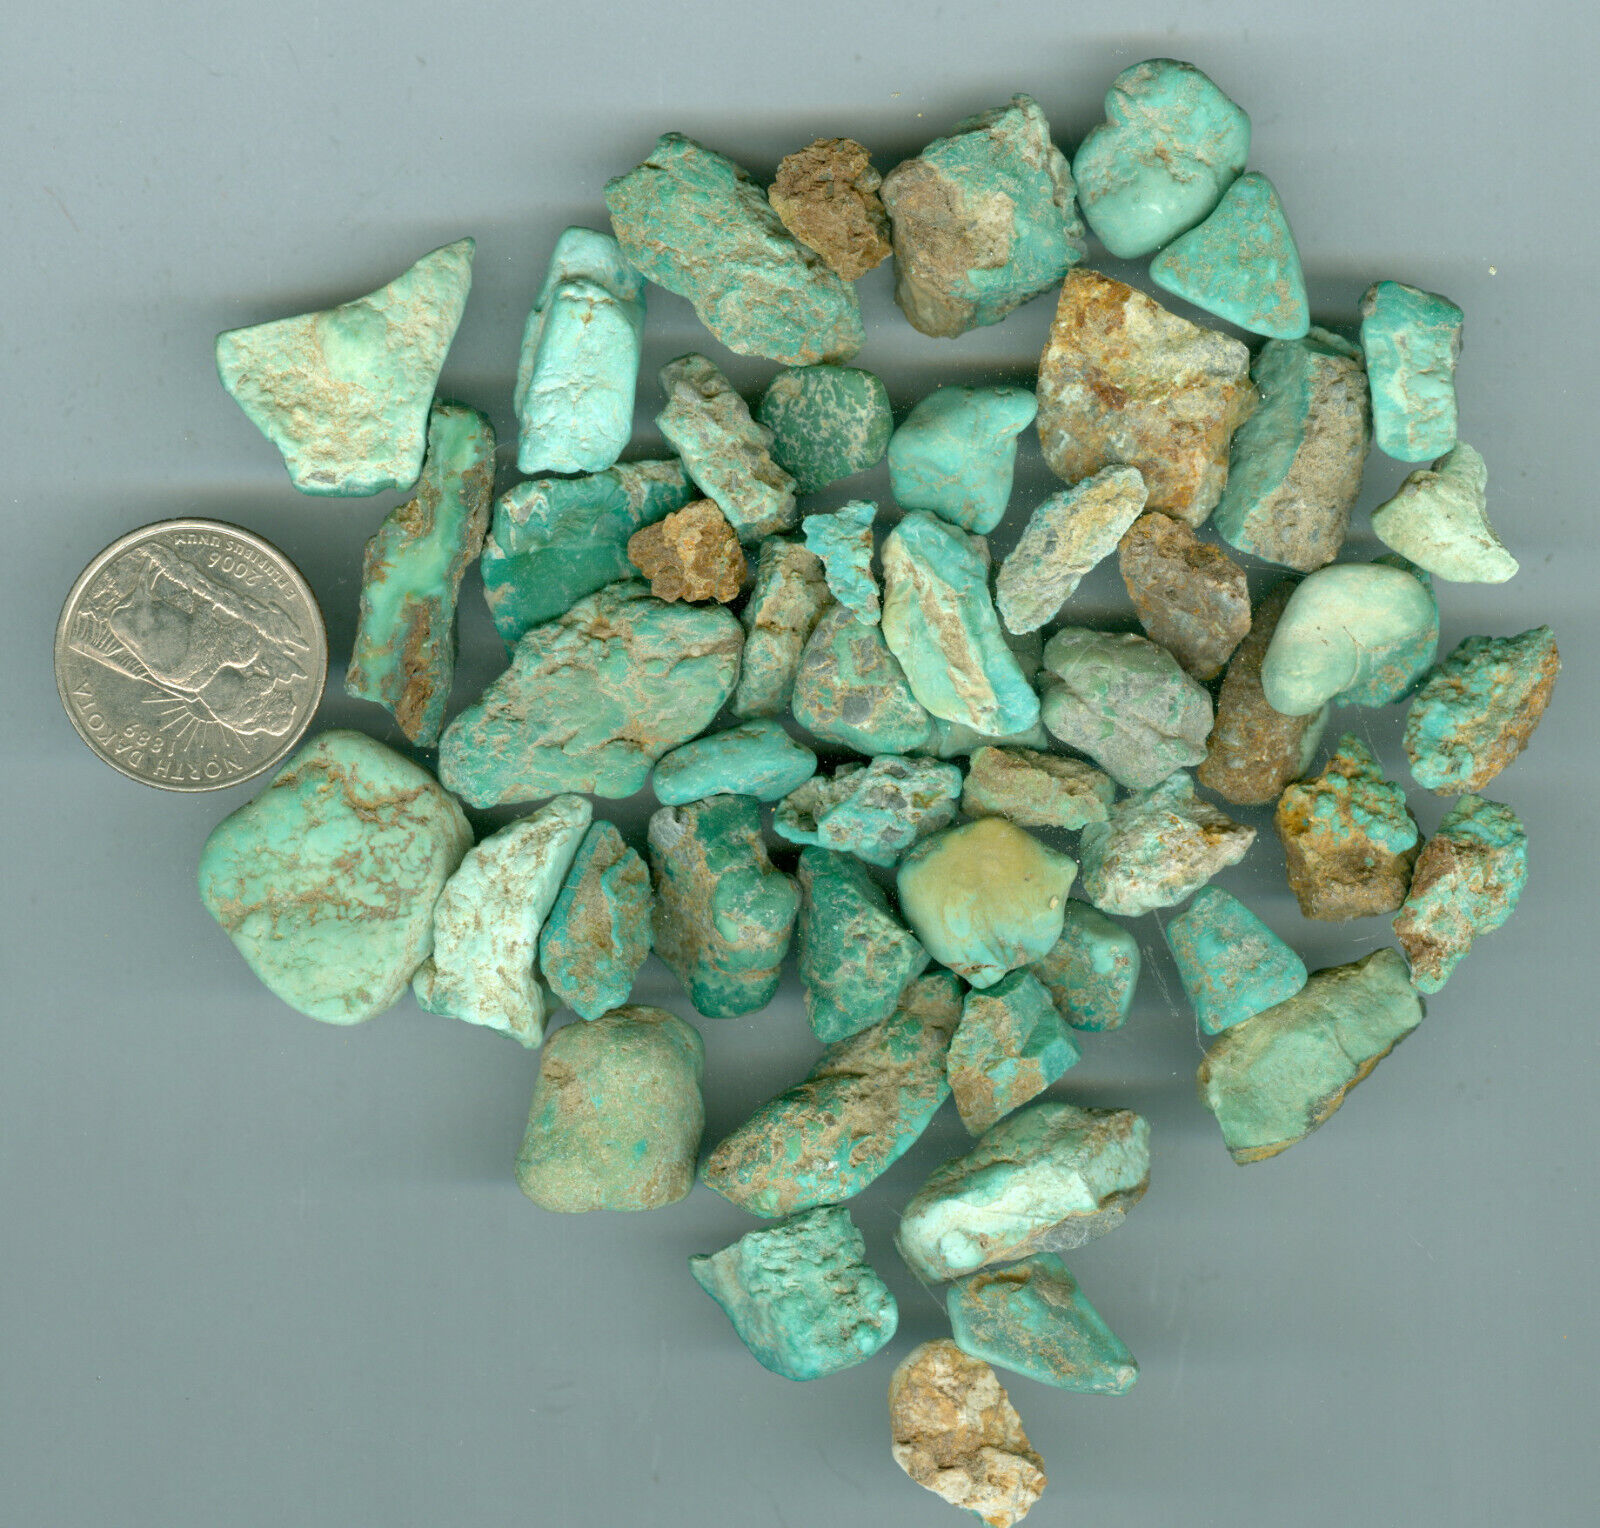   Turquoise Rough 121 grams of Natural American Turquoise Fox Mine Cutting Rough